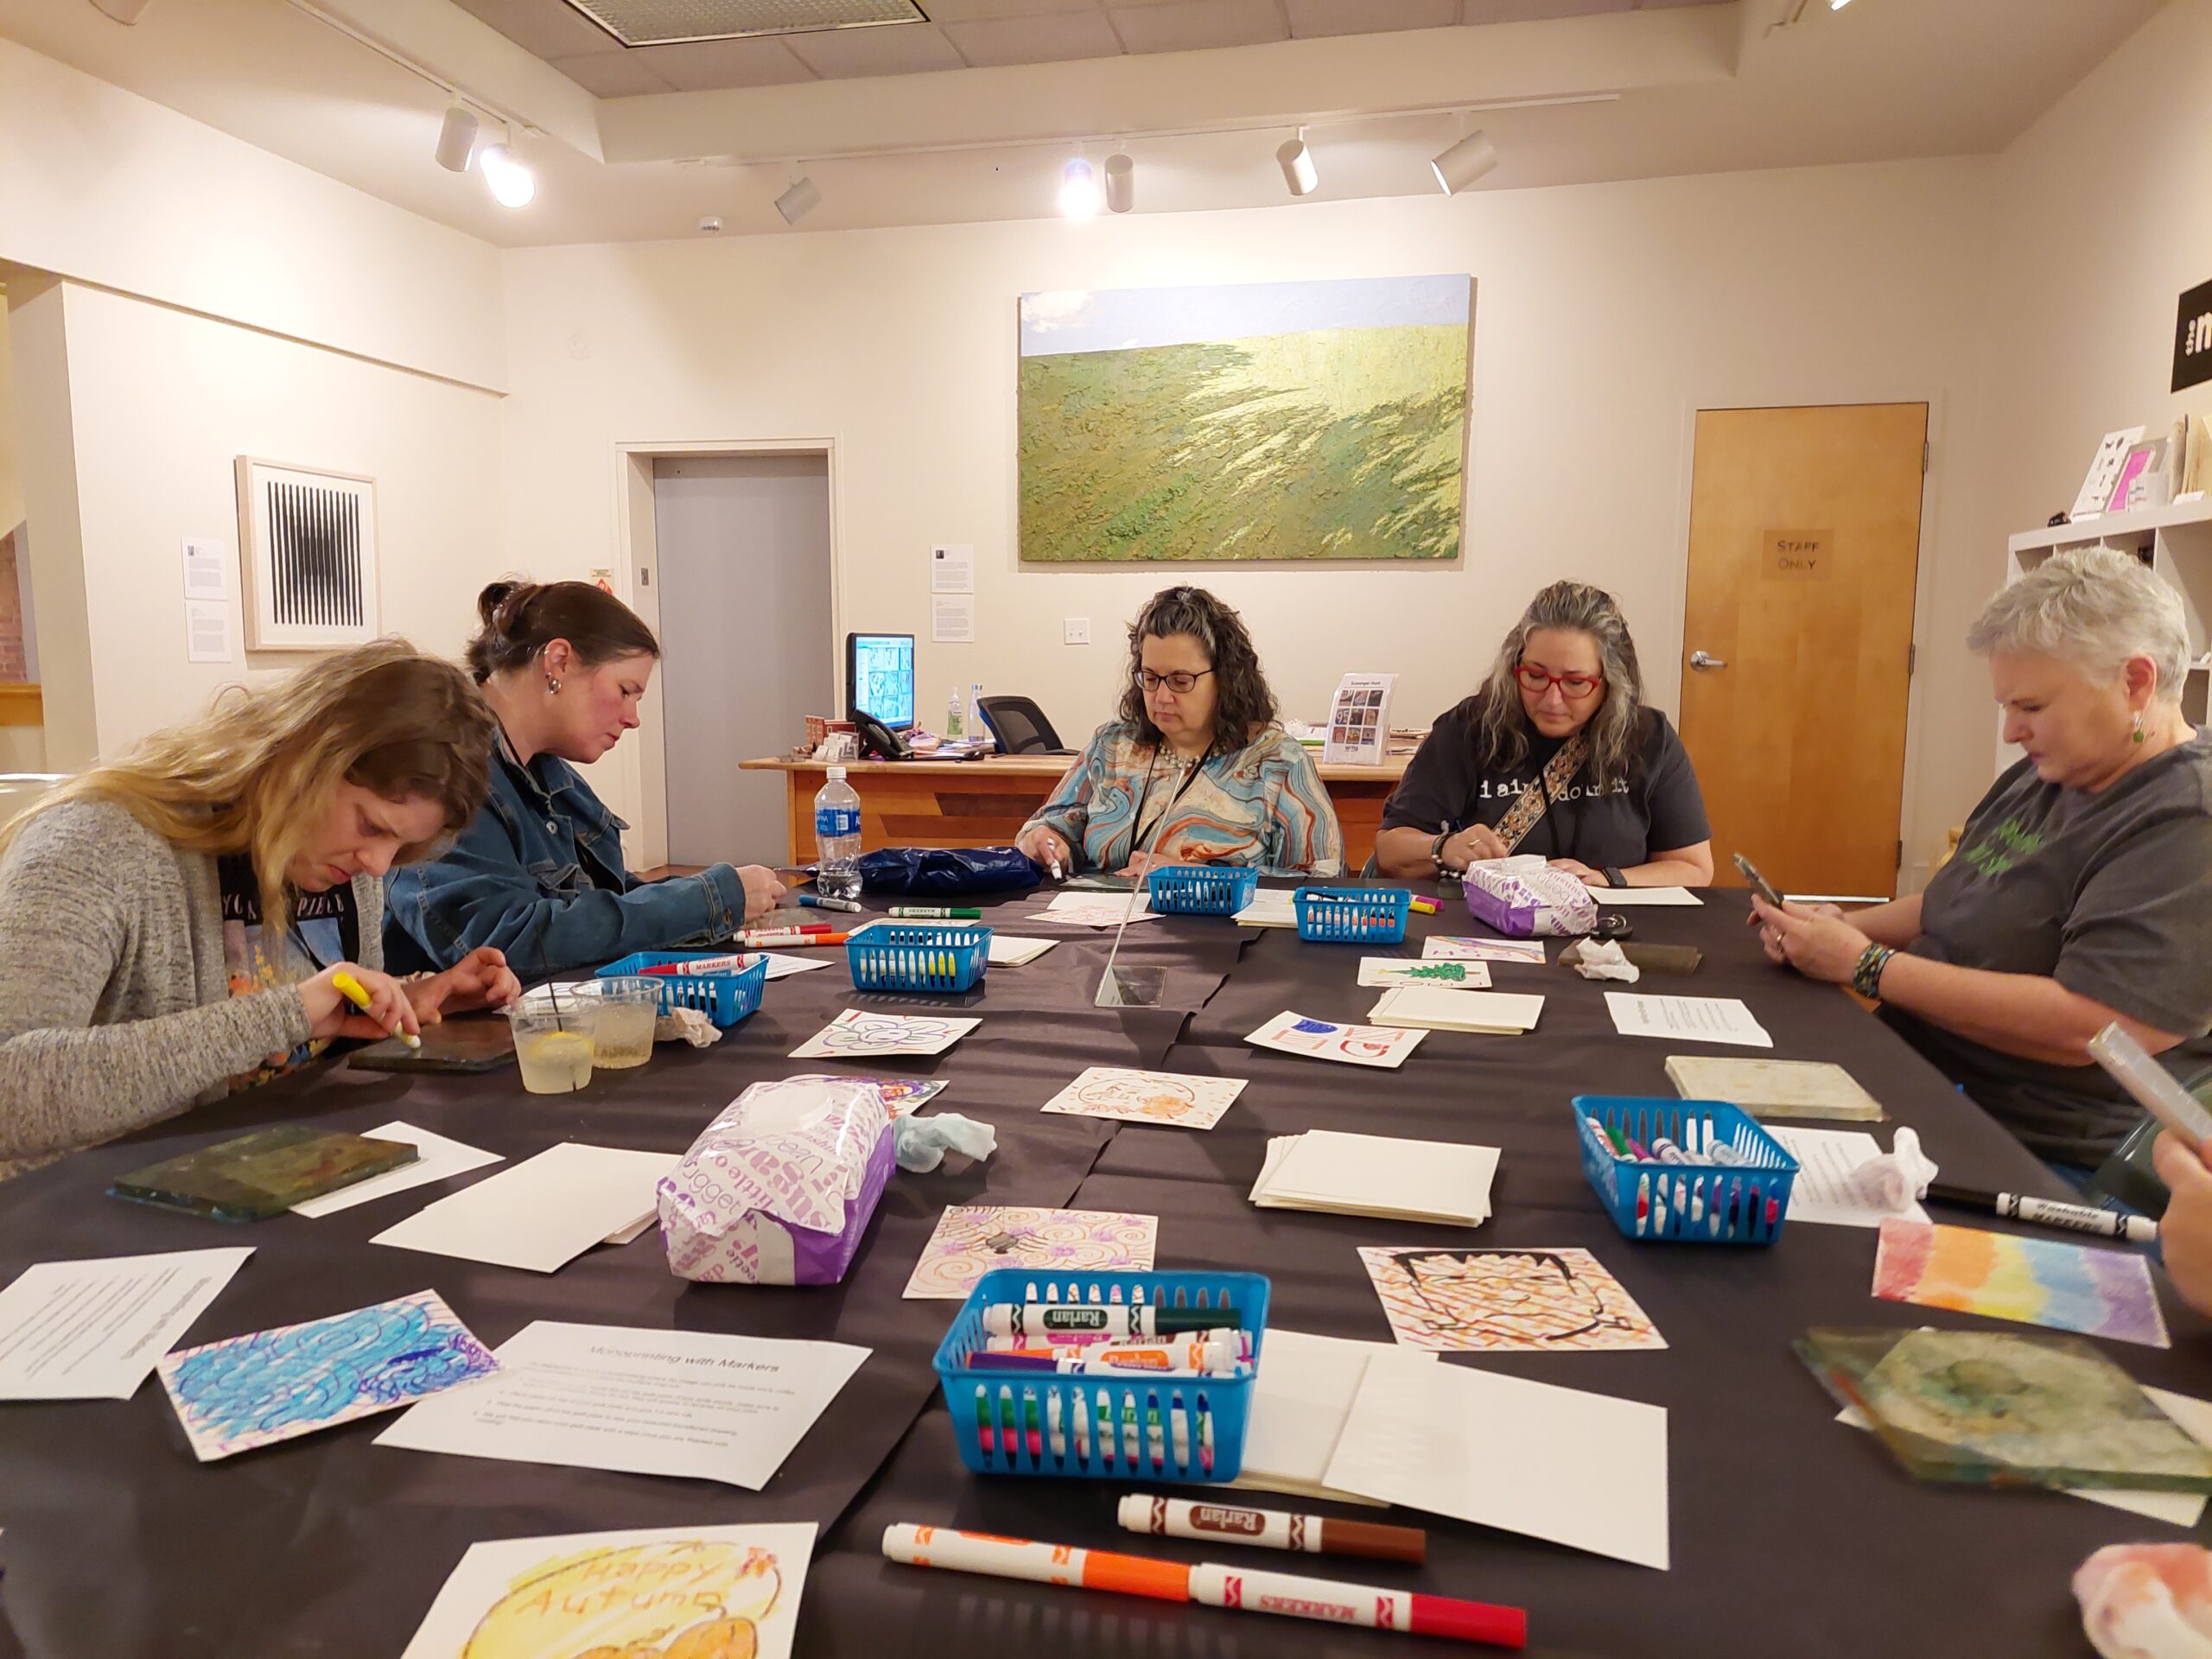 A group of 6 educators enjoy learning to experiment with gelli plates with markers.